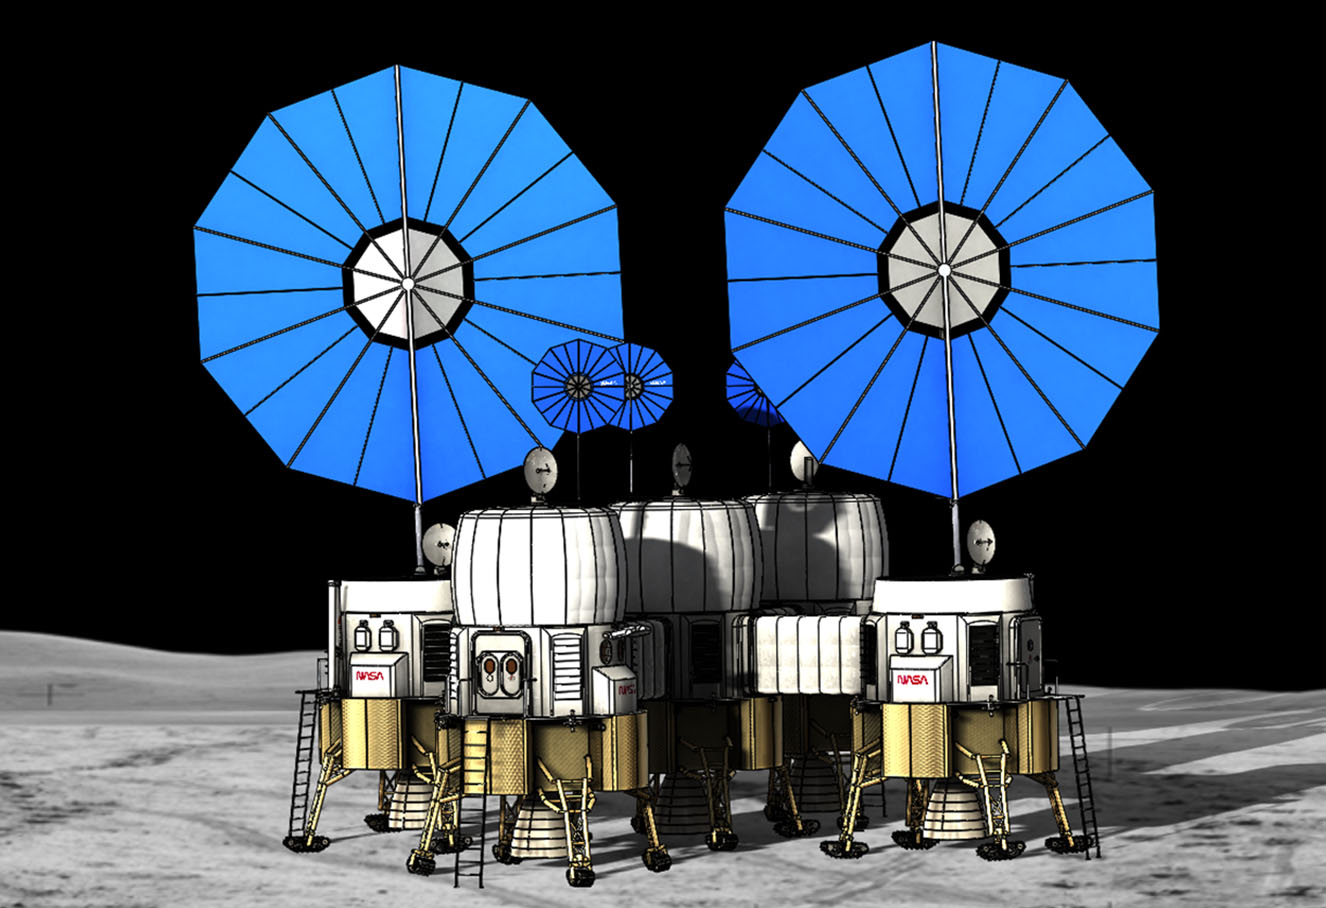 A render of a lunar base developed by CPP engineering students